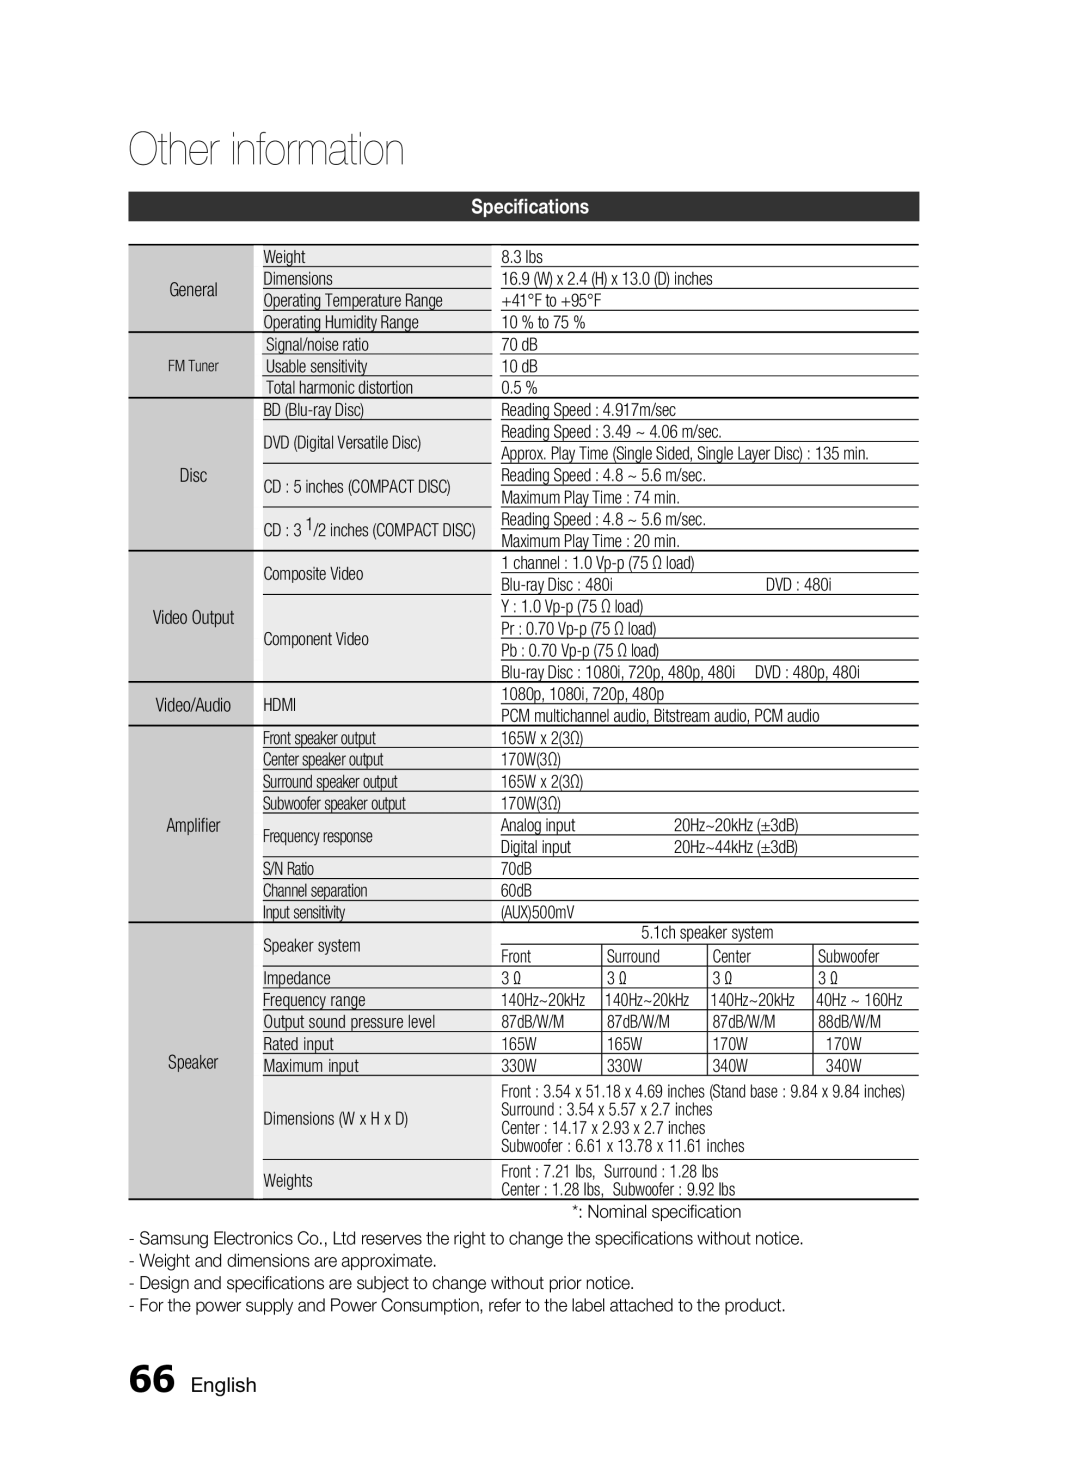 Samsung AH68-02255S, HT-C6530 user manual English, Other information 